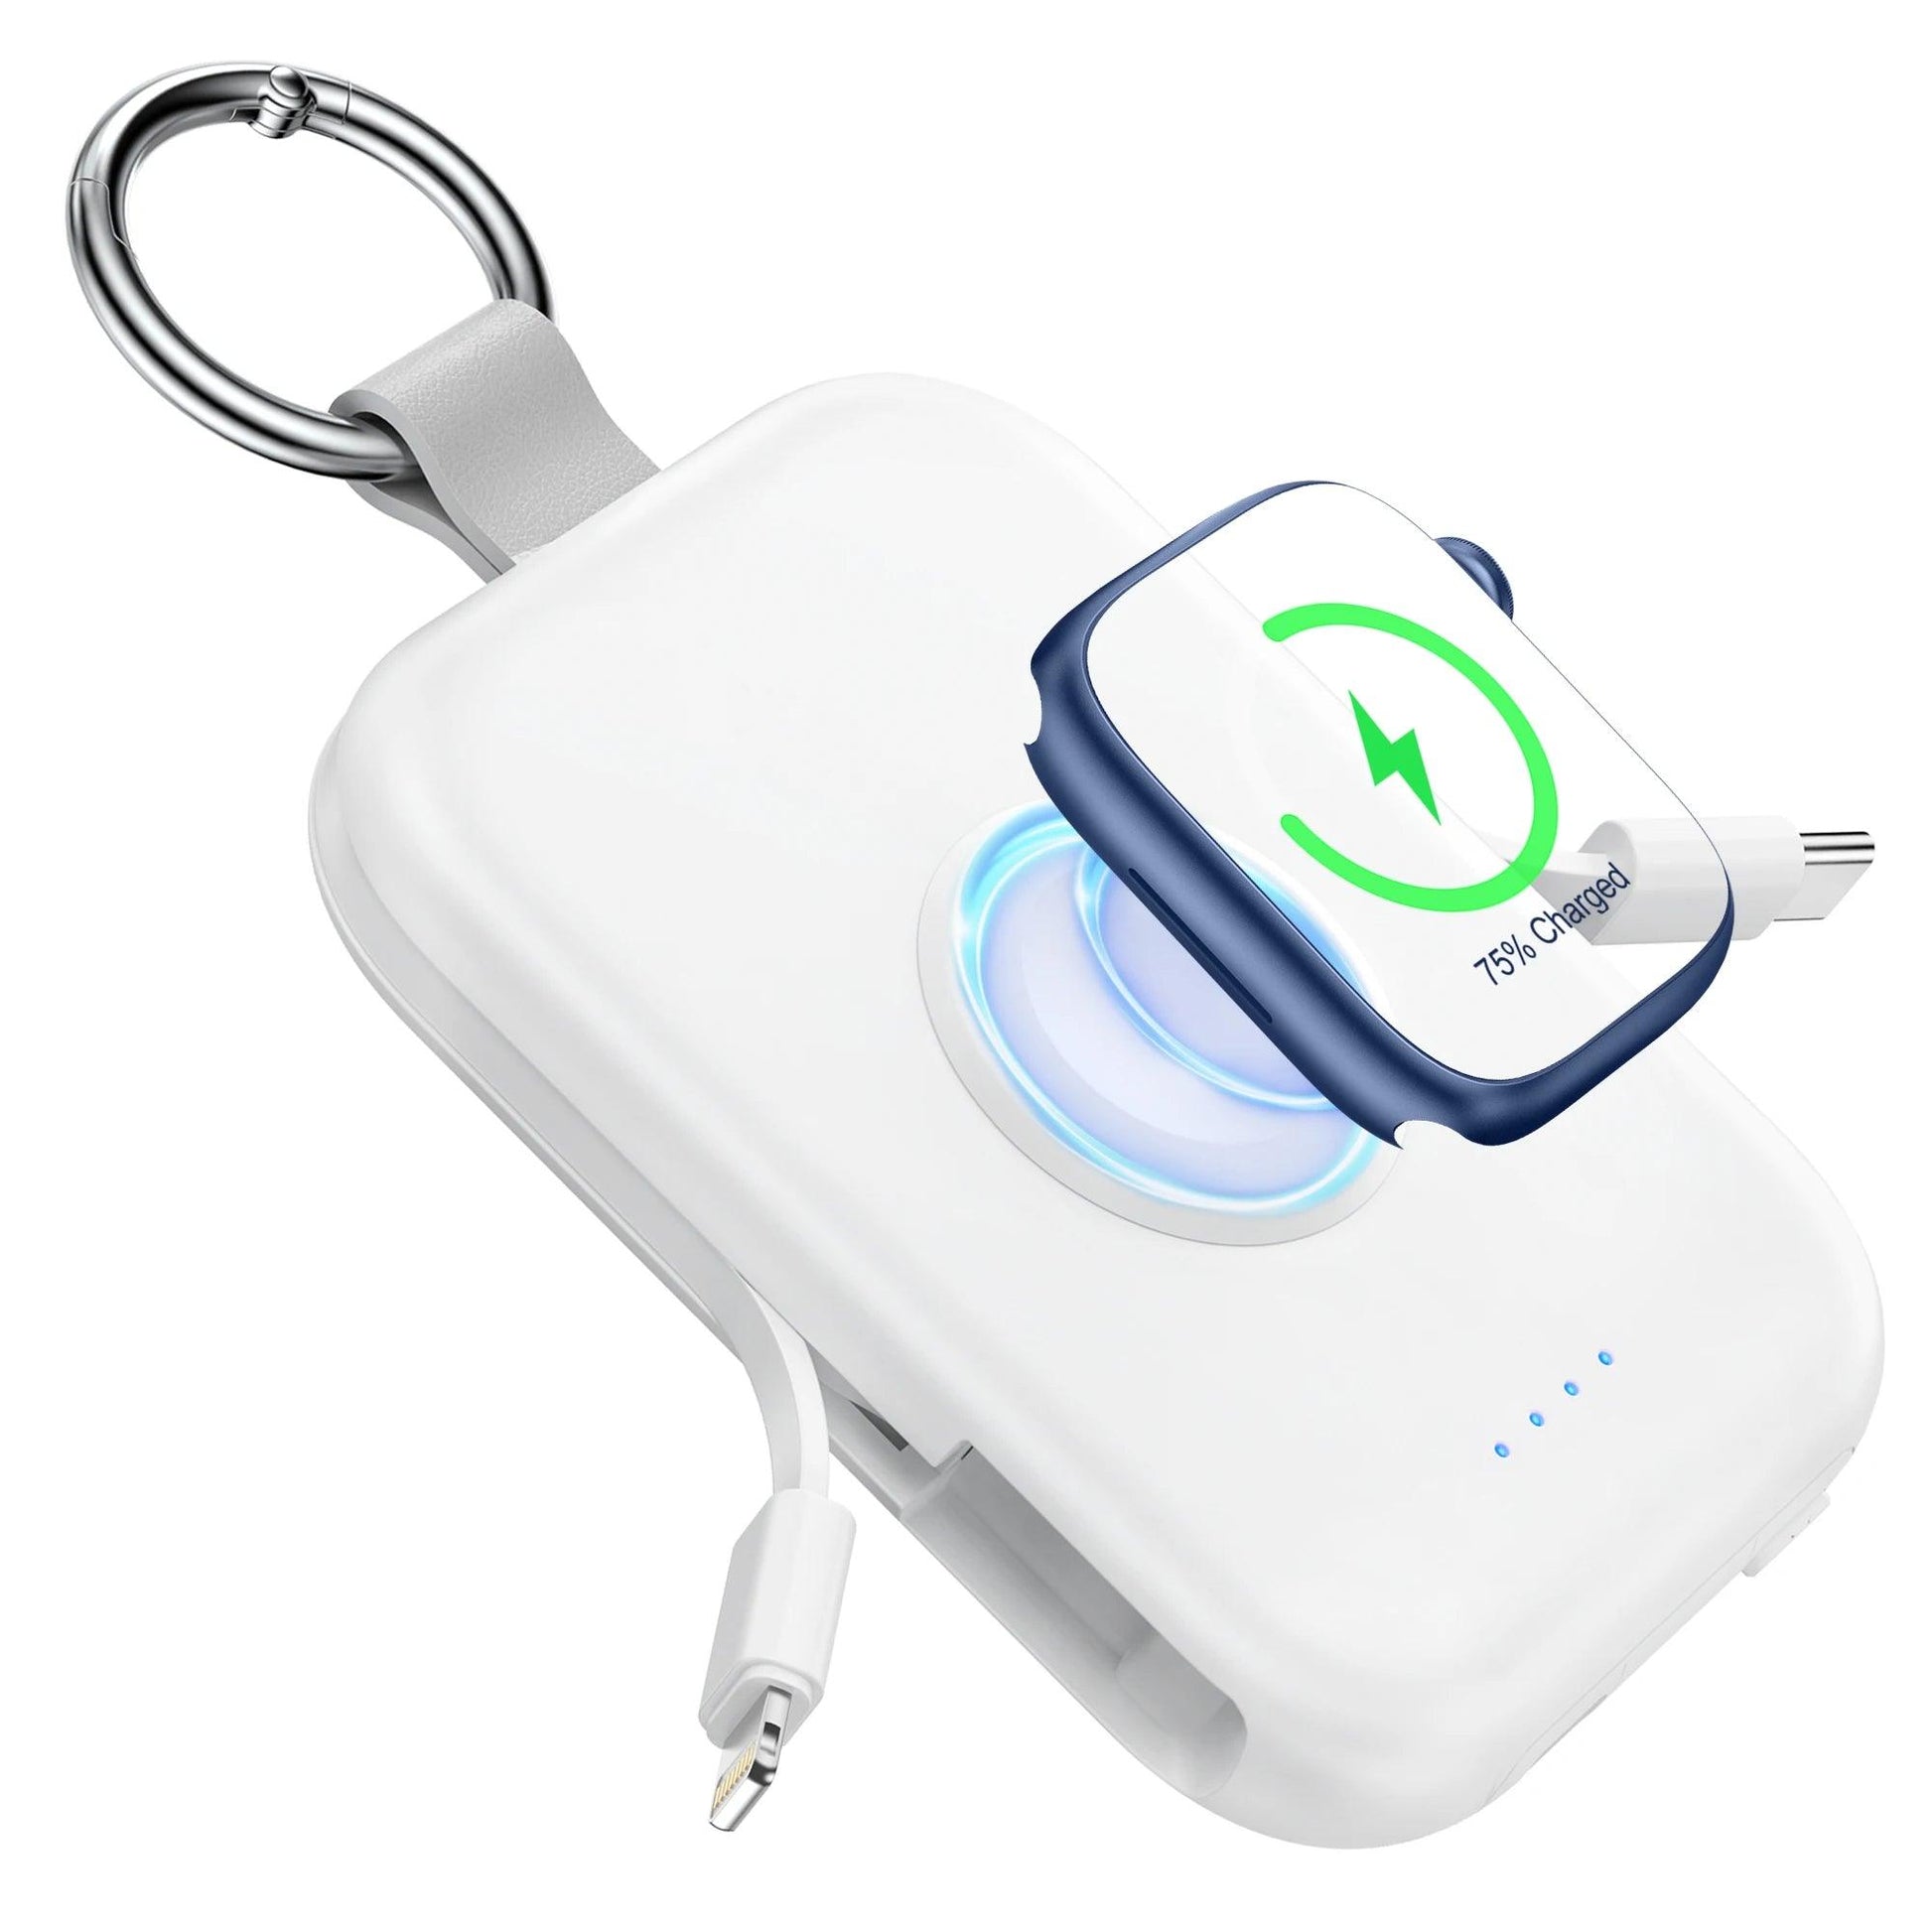 Portable Power Bank for iPhone | apple watch wireless charger |Diversi